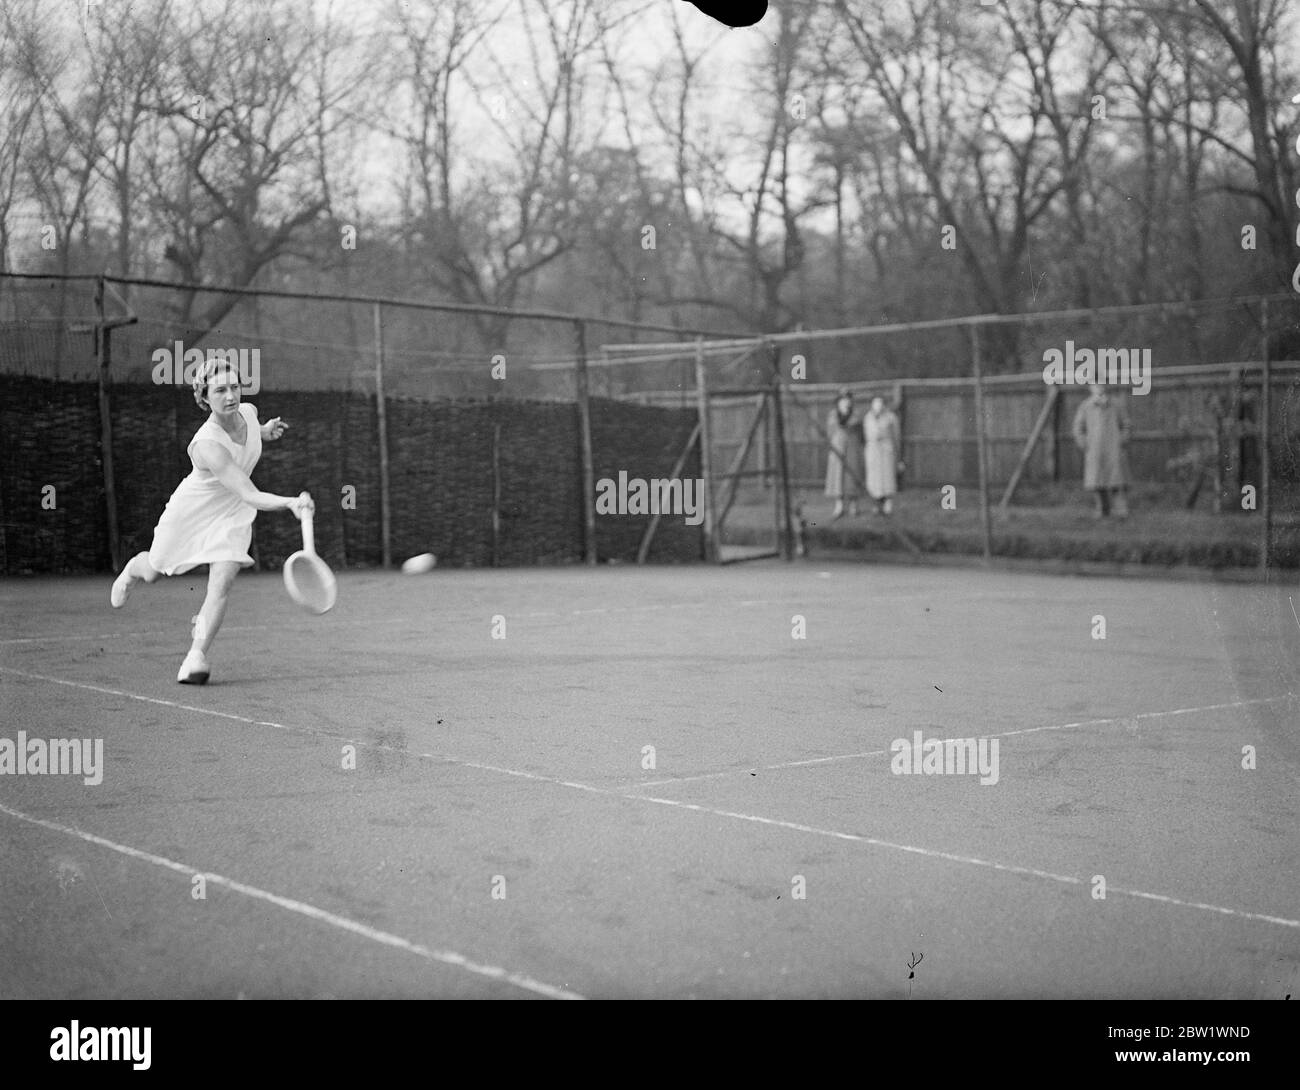 Mary Hardwick meets Miss Scriven in Melbury Club semifinals. Miss R M Hardwick met Miss M C Scriven in the semifinals of the Melbury Lawn Tennis Club tournament at the Melbury Club, Kensington. Photo shows, a remarkable action picture of Miss Mary Hardwick in play in the semifinals. 16 April 1937 Stock Photo